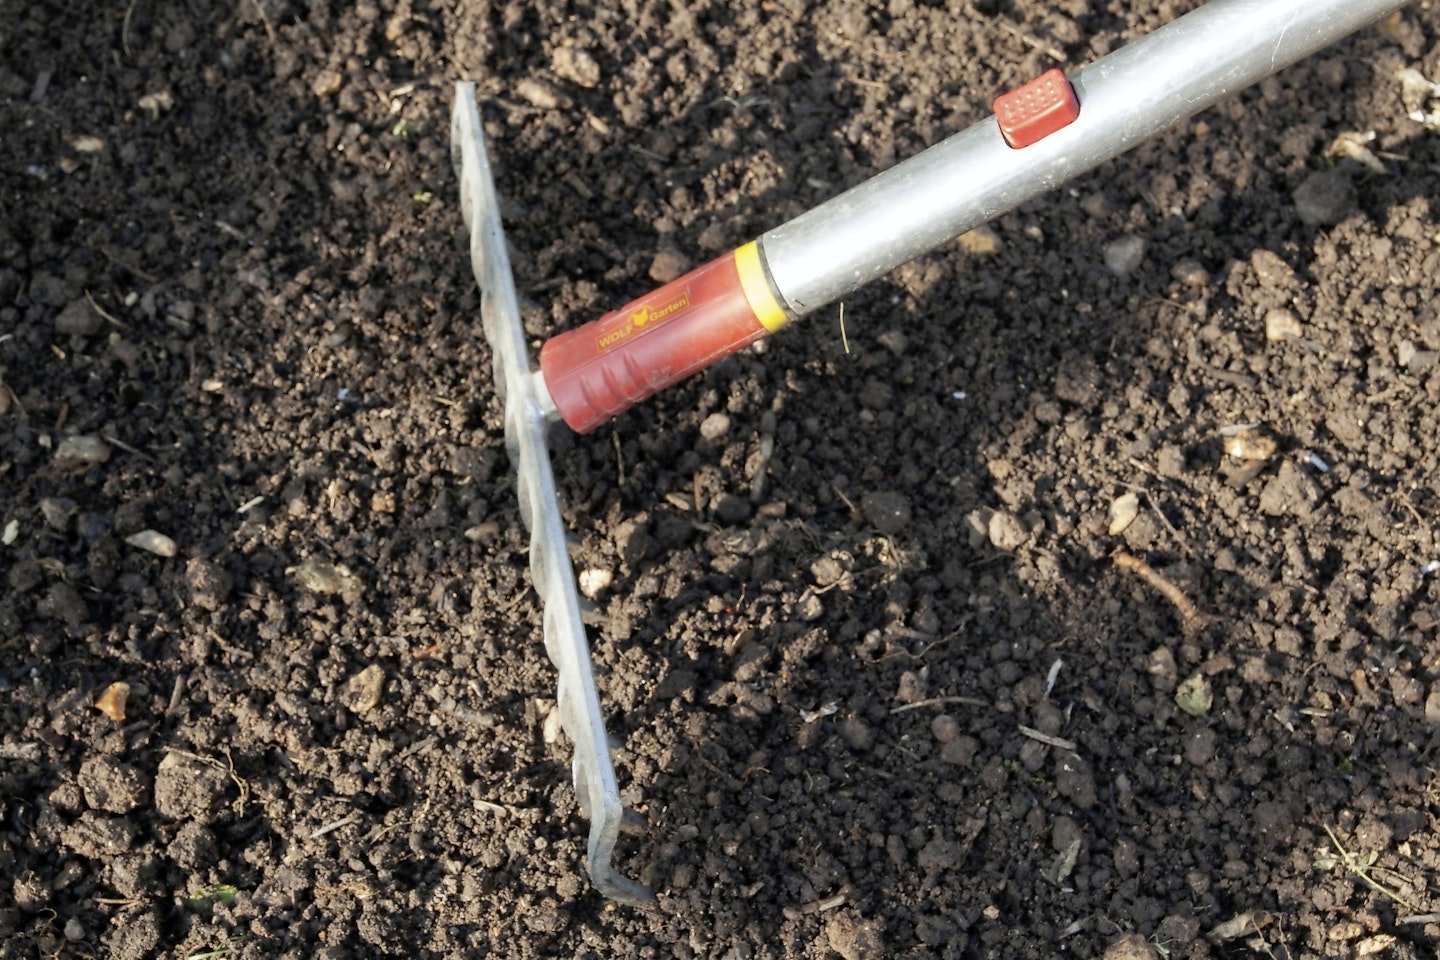 Rake soil so it’s free of lumps and lightly firm to create a level seed bed.